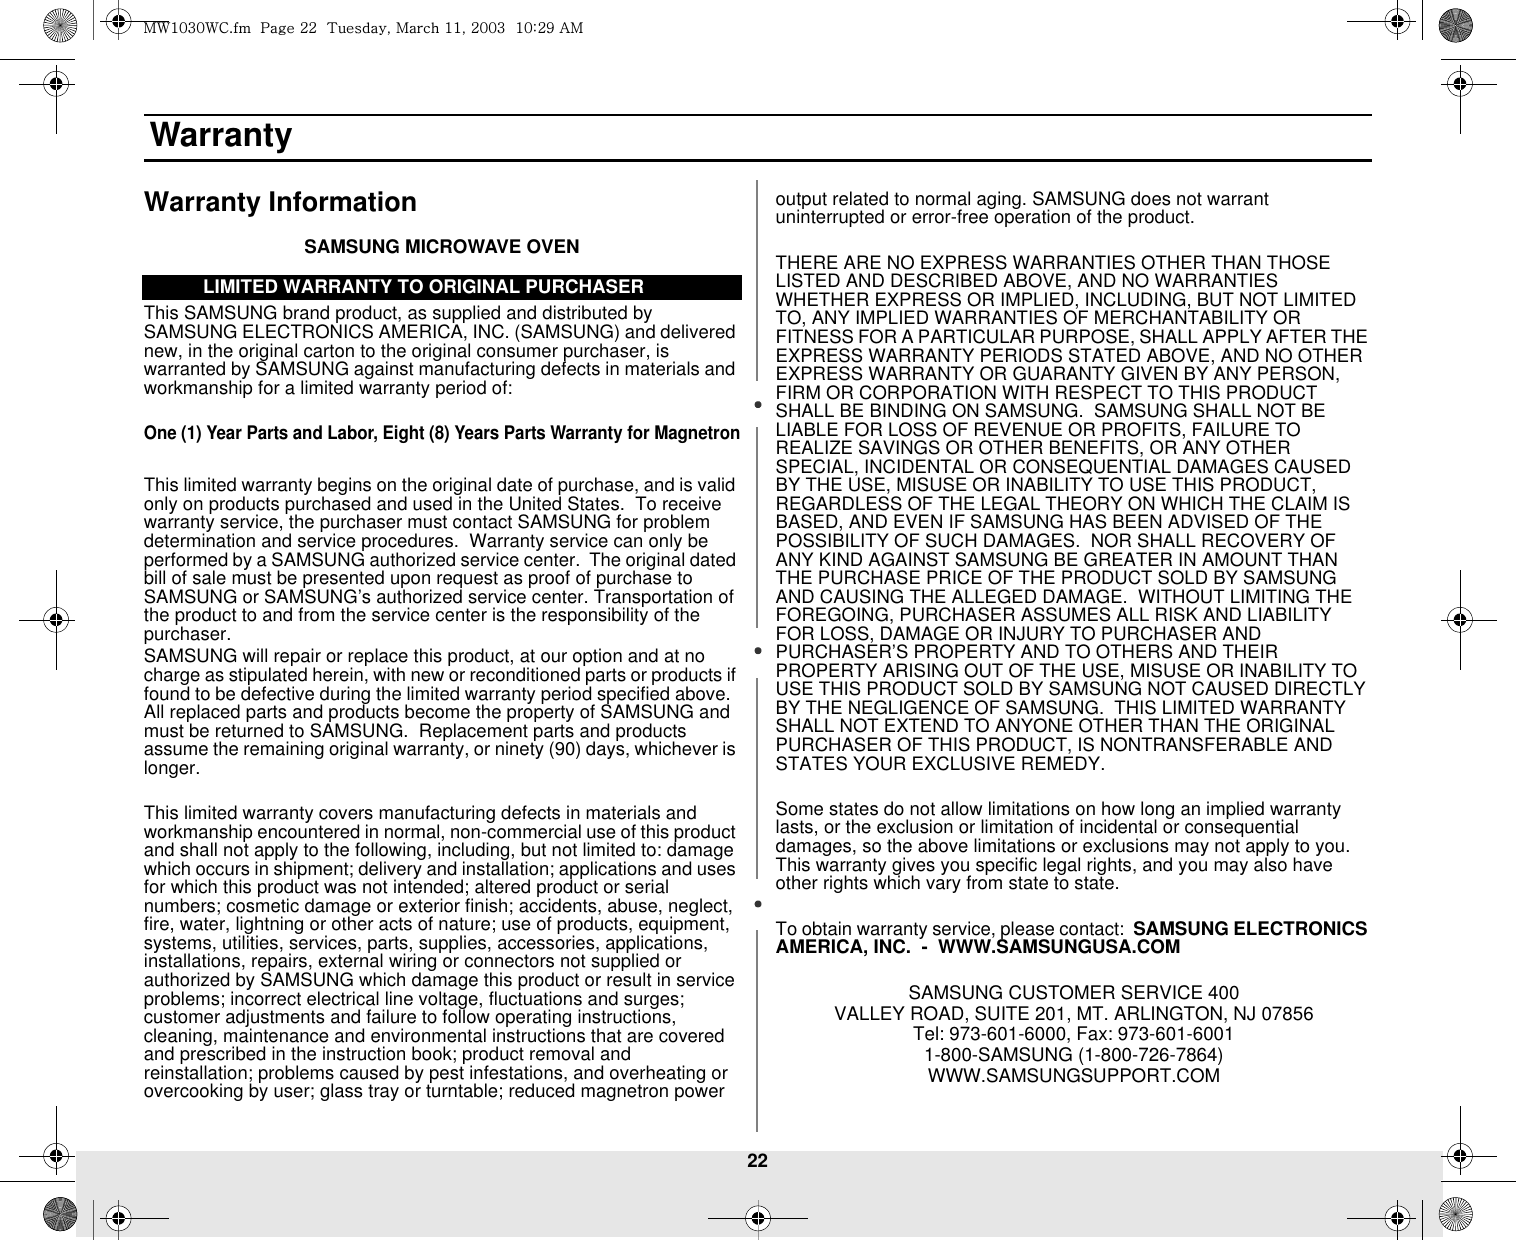 22 WarrantyWarranty InformationSAMSUNG MICROWAVE OVENThis SAMSUNG brand product, as supplied and distributed by SAMSUNG ELECTRONICS AMERICA, INC. (SAMSUNG) and delivered new, in the original carton to the original consumer purchaser, is warranted by SAMSUNG against manufacturing defects in materials and workmanship for a limited warranty period of:One (1) Year Parts and Labor, Eight (8) Years Parts Warranty for MagnetronThis limited warranty begins on the original date of purchase, and is valid only on products purchased and used in the United States.  To receive warranty service, the purchaser must contact SAMSUNG for problem determination and service procedures.  Warranty service can only be performed by a SAMSUNG authorized service center.  The original dated bill of sale must be presented upon request as proof of purchase to SAMSUNG or SAMSUNG’s authorized service center. Transportation of the product to and from the service center is the responsibility of the purchaser.SAMSUNG will repair or replace this product, at our option and at no charge as stipulated herein, with new or reconditioned parts or products if found to be defective during the limited warranty period specified above.  All replaced parts and products become the property of SAMSUNG and must be returned to SAMSUNG.  Replacement parts and products assume the remaining original warranty, or ninety (90) days, whichever is longer.This limited warranty covers manufacturing defects in materials and workmanship encountered in normal, non-commercial use of this product and shall not apply to the following, including, but not limited to: damage which occurs in shipment; delivery and installation; applications and uses for which this product was not intended; altered product or serial numbers; cosmetic damage or exterior finish; accidents, abuse, neglect, fire, water, lightning or other acts of nature; use of products, equipment, systems, utilities, services, parts, supplies, accessories, applications, installations, repairs, external wiring or connectors not supplied or authorized by SAMSUNG which damage this product or result in service problems; incorrect electrical line voltage, fluctuations and surges; customer adjustments and failure to follow operating instructions, cleaning, maintenance and environmental instructions that are covered and prescribed in the instruction book; product removal and reinstallation; problems caused by pest infestations, and overheating or overcooking by user; glass tray or turntable; reduced magnetron power output related to normal aging. SAMSUNG does not warrant uninterrupted or error-free operation of the product.THERE ARE NO EXPRESS WARRANTIES OTHER THAN THOSE LISTED AND DESCRIBED ABOVE, AND NO WARRANTIES WHETHER EXPRESS OR IMPLIED, INCLUDING, BUT NOT LIMITED TO, ANY IMPLIED WARRANTIES OF MERCHANTABILITY OR FITNESS FOR A PARTICULAR PURPOSE, SHALL APPLY AFTER THE EXPRESS WARRANTY PERIODS STATED ABOVE, AND NO OTHER EXPRESS WARRANTY OR GUARANTY GIVEN BY ANY PERSON, FIRM OR CORPORATION WITH RESPECT TO THIS PRODUCT SHALL BE BINDING ON SAMSUNG.  SAMSUNG SHALL NOT BE LIABLE FOR LOSS OF REVENUE OR PROFITS, FAILURE TO REALIZE SAVINGS OR OTHER BENEFITS, OR ANY OTHER SPECIAL, INCIDENTAL OR CONSEQUENTIAL DAMAGES CAUSED BY THE USE, MISUSE OR INABILITY TO USE THIS PRODUCT, REGARDLESS OF THE LEGAL THEORY ON WHICH THE CLAIM IS BASED, AND EVEN IF SAMSUNG HAS BEEN ADVISED OF THE POSSIBILITY OF SUCH DAMAGES.  NOR SHALL RECOVERY OF ANY KIND AGAINST SAMSUNG BE GREATER IN AMOUNT THAN THE PURCHASE PRICE OF THE PRODUCT SOLD BY SAMSUNG AND CAUSING THE ALLEGED DAMAGE.  WITHOUT LIMITING THE FOREGOING, PURCHASER ASSUMES ALL RISK AND LIABILITY FOR LOSS, DAMAGE OR INJURY TO PURCHASER AND PURCHASER’S PROPERTY AND TO OTHERS AND THEIR PROPERTY ARISING OUT OF THE USE, MISUSE OR INABILITY TO USE THIS PRODUCT SOLD BY SAMSUNG NOT CAUSED DIRECTLY BY THE NEGLIGENCE OF SAMSUNG.  THIS LIMITED WARRANTY SHALL NOT EXTEND TO ANYONE OTHER THAN THE ORIGINAL PURCHASER OF THIS PRODUCT, IS NONTRANSFERABLE AND STATES YOUR EXCLUSIVE REMEDY.Some states do not allow limitations on how long an implied warranty lasts, or the exclusion or limitation of incidental or consequential damages, so the above limitations or exclusions may not apply to you.  This warranty gives you specific legal rights, and you may also have other rights which vary from state to state.To obtain warranty service, please contact:  SAMSUNG ELECTRONICS AMERICA, INC.  -  WWW.SAMSUNGUSA.COMSAMSUNG CUSTOMER SERVICE 400 VALLEY ROAD, SUITE 201, MT. ARLINGTON, NJ 07856Tel: 973-601-6000, Fax: 973-601-60011-800-SAMSUNG (1-800-726-7864)WWW.SAMSUNGSUPPORT.COMLIMITED WARRANTY TO ORIGINAL PURCHASERt~XWZW~jUGGwGYYGG{SGtGXXSGYWWZGGXWaY`Ght